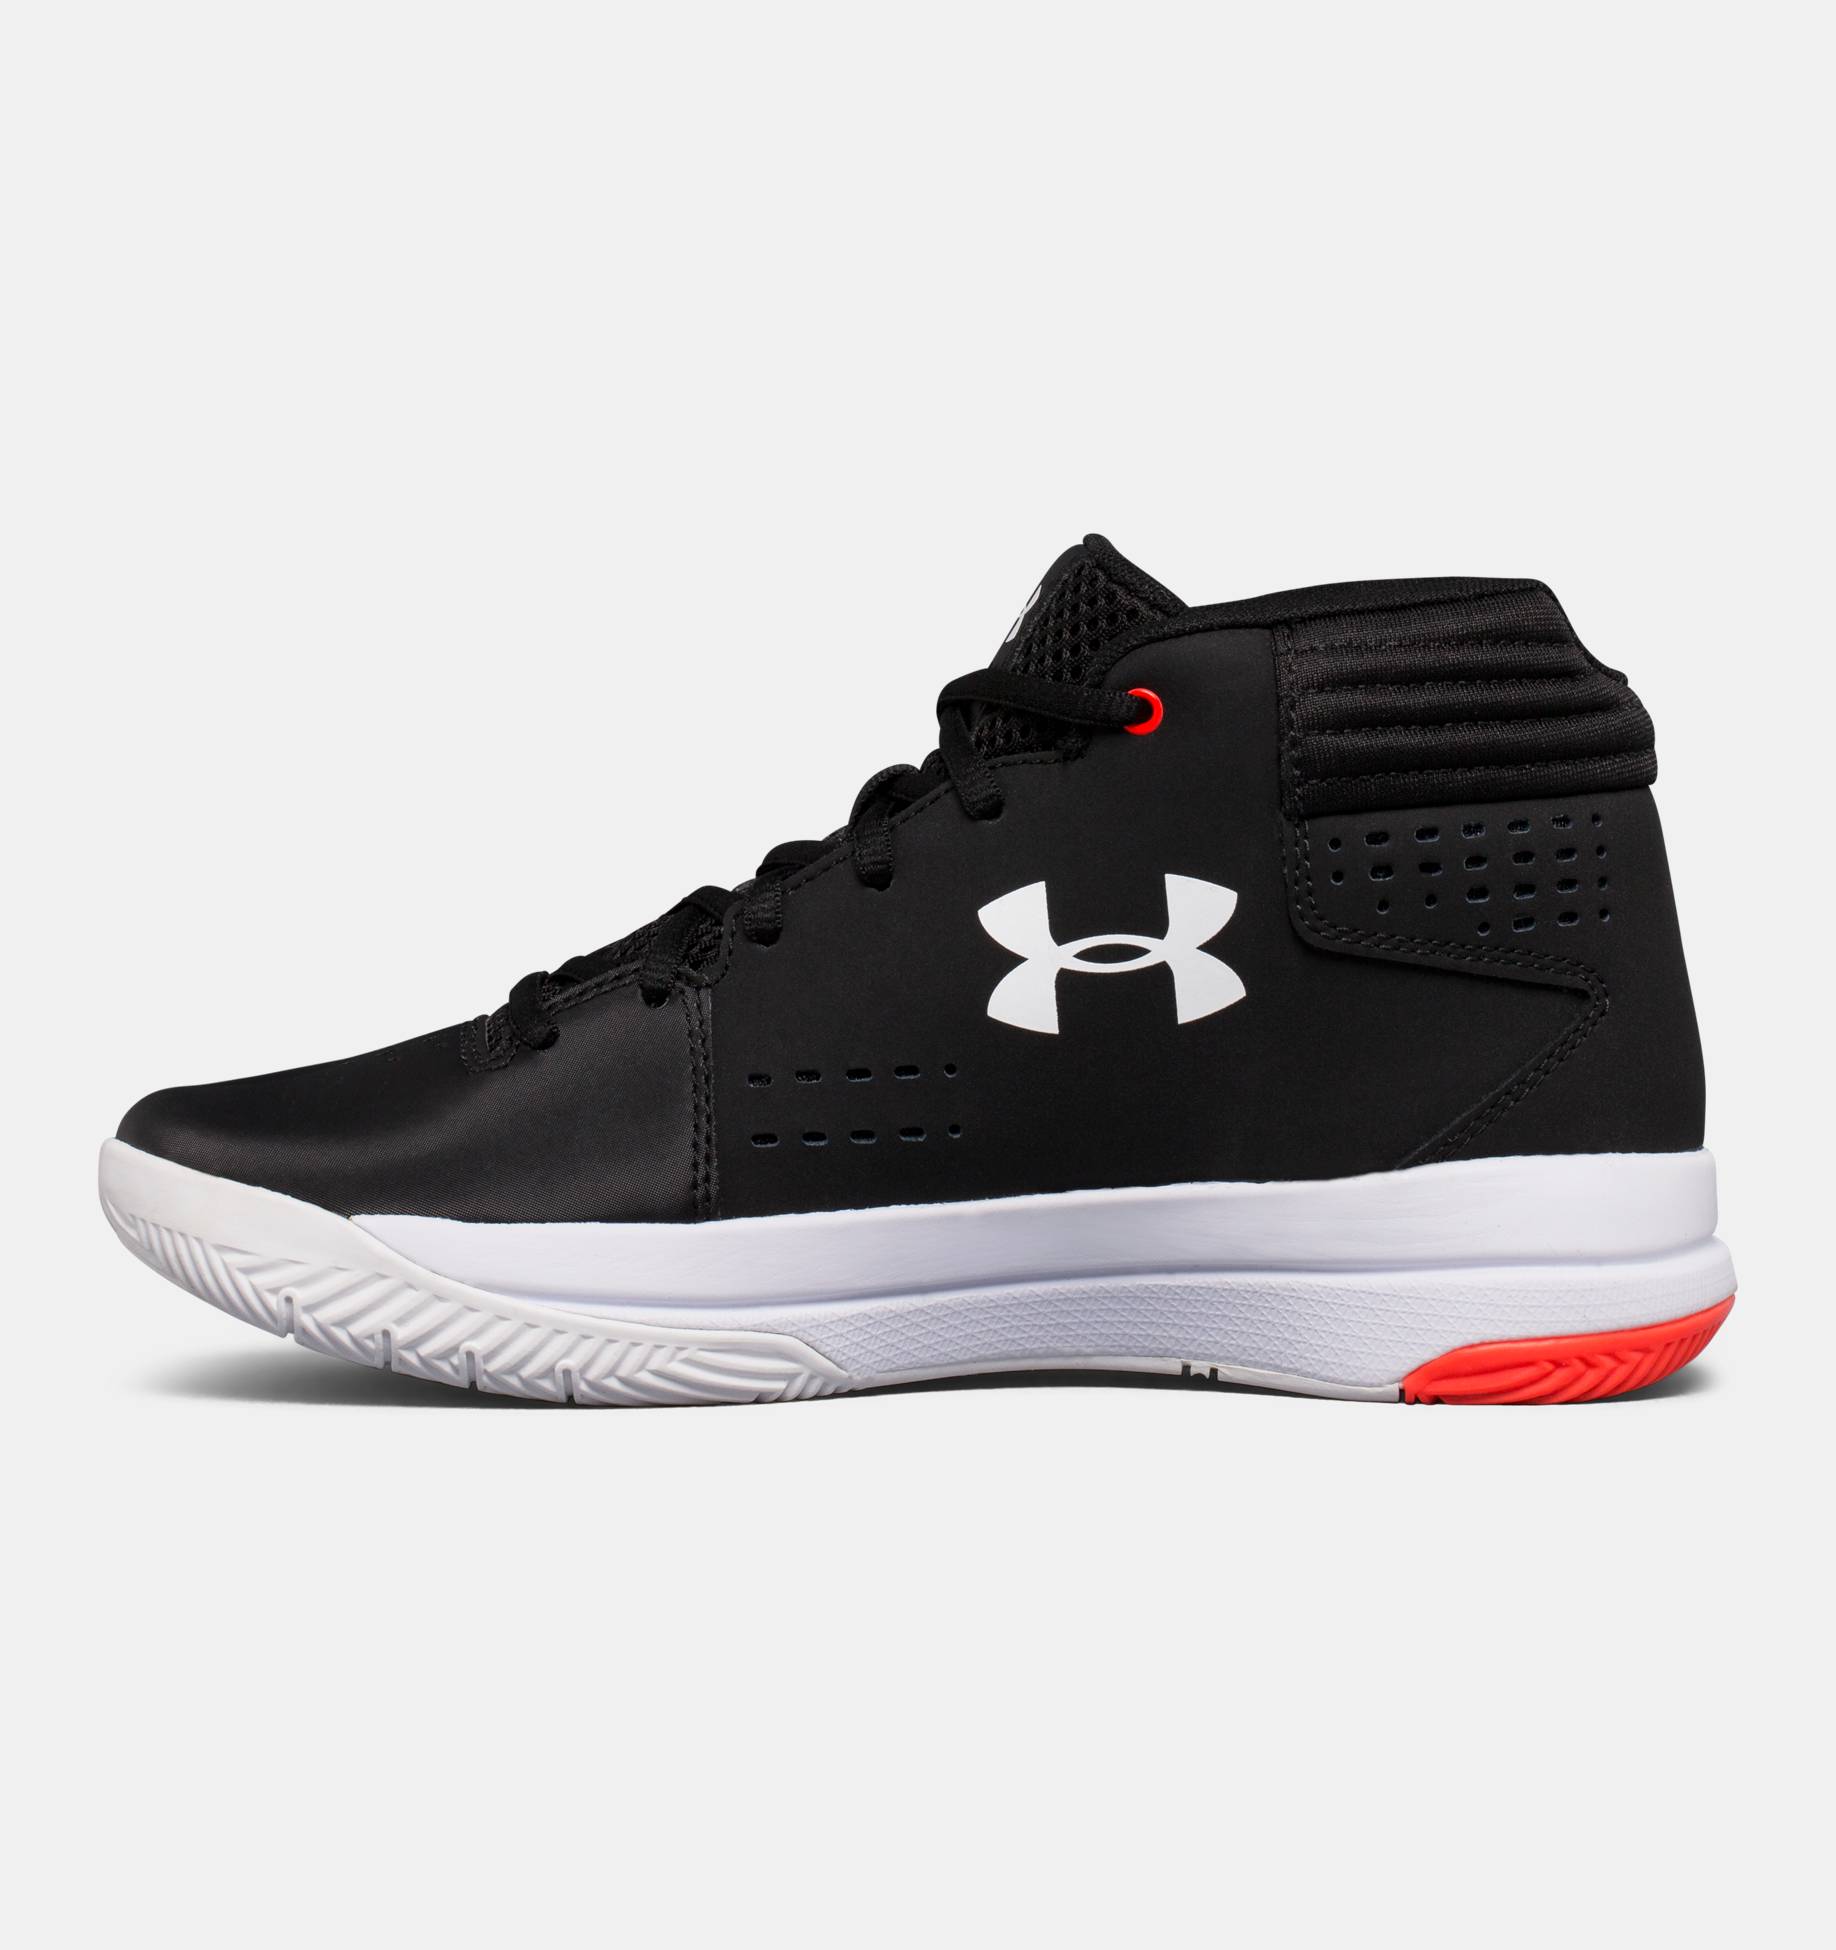 Basketball Shoes -  under armour Grade School Jet Shoes 6009